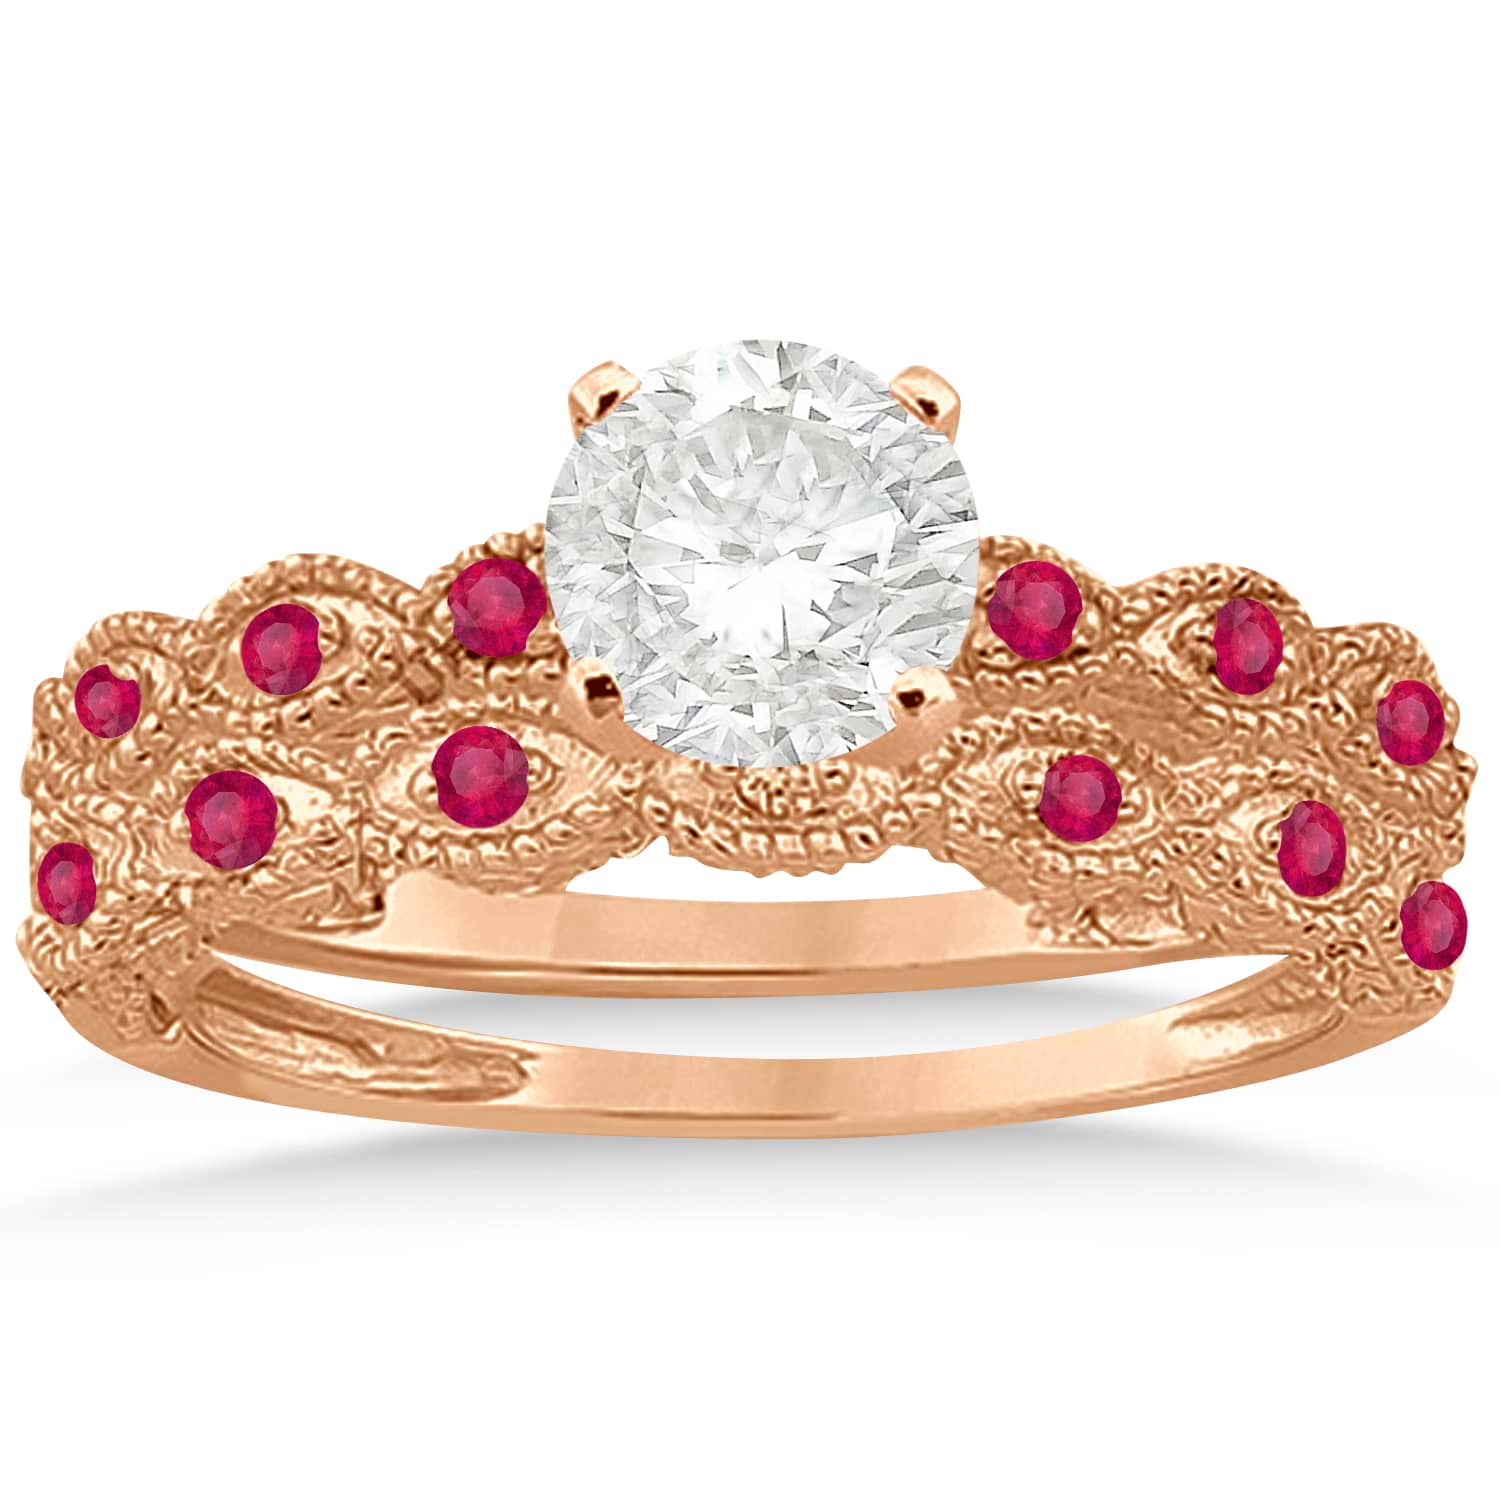 Antique Ruby Engagement Ring and Wedding Band 18k Rose Gold (0.36ct)